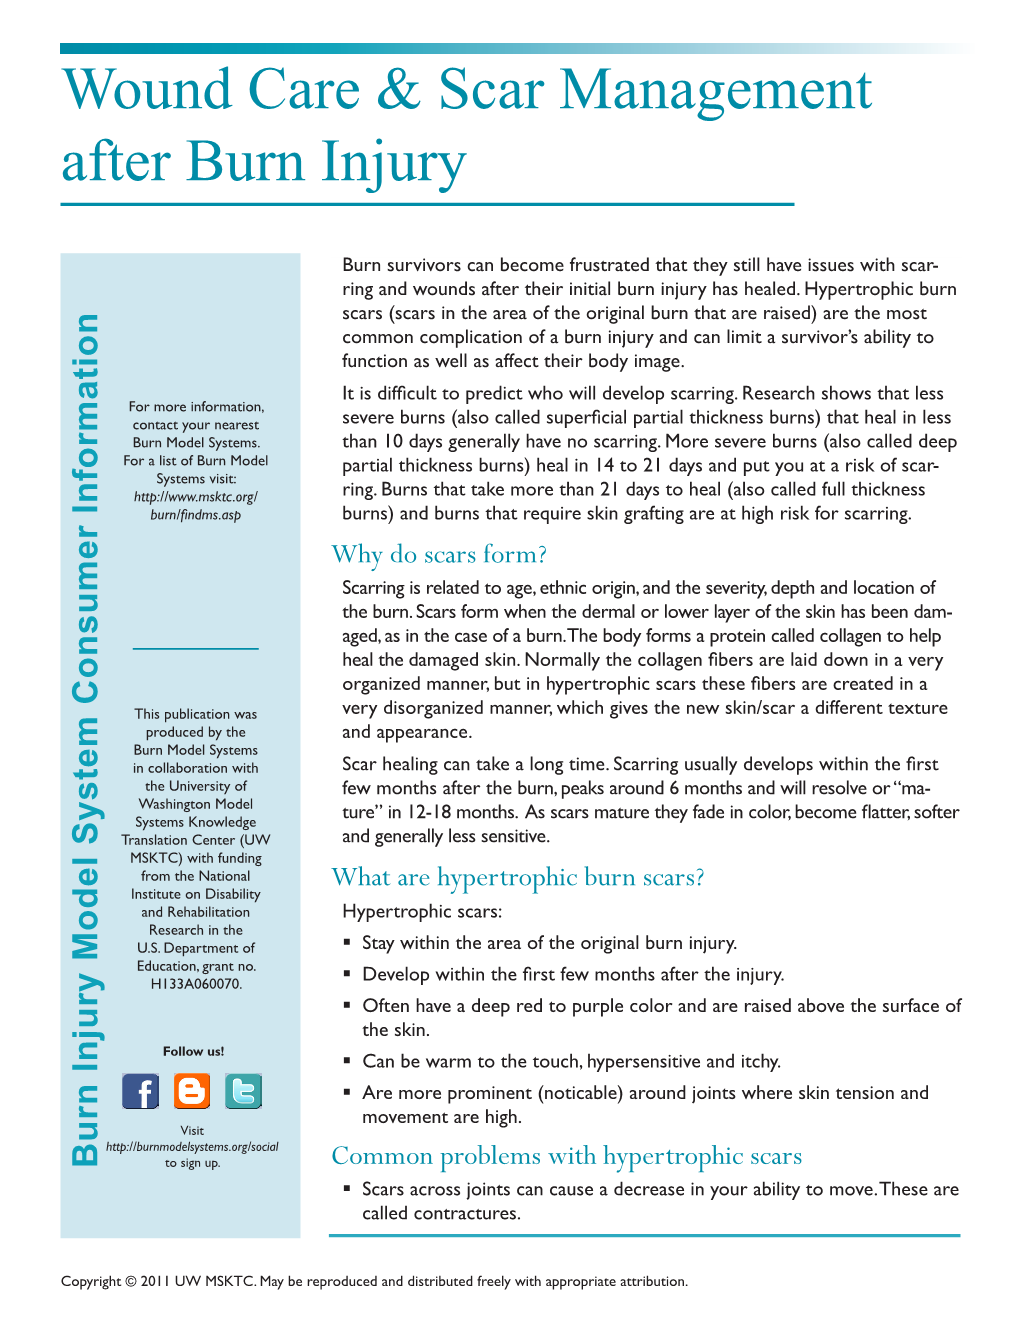 Wound Care & Scar Management After Burn Injury